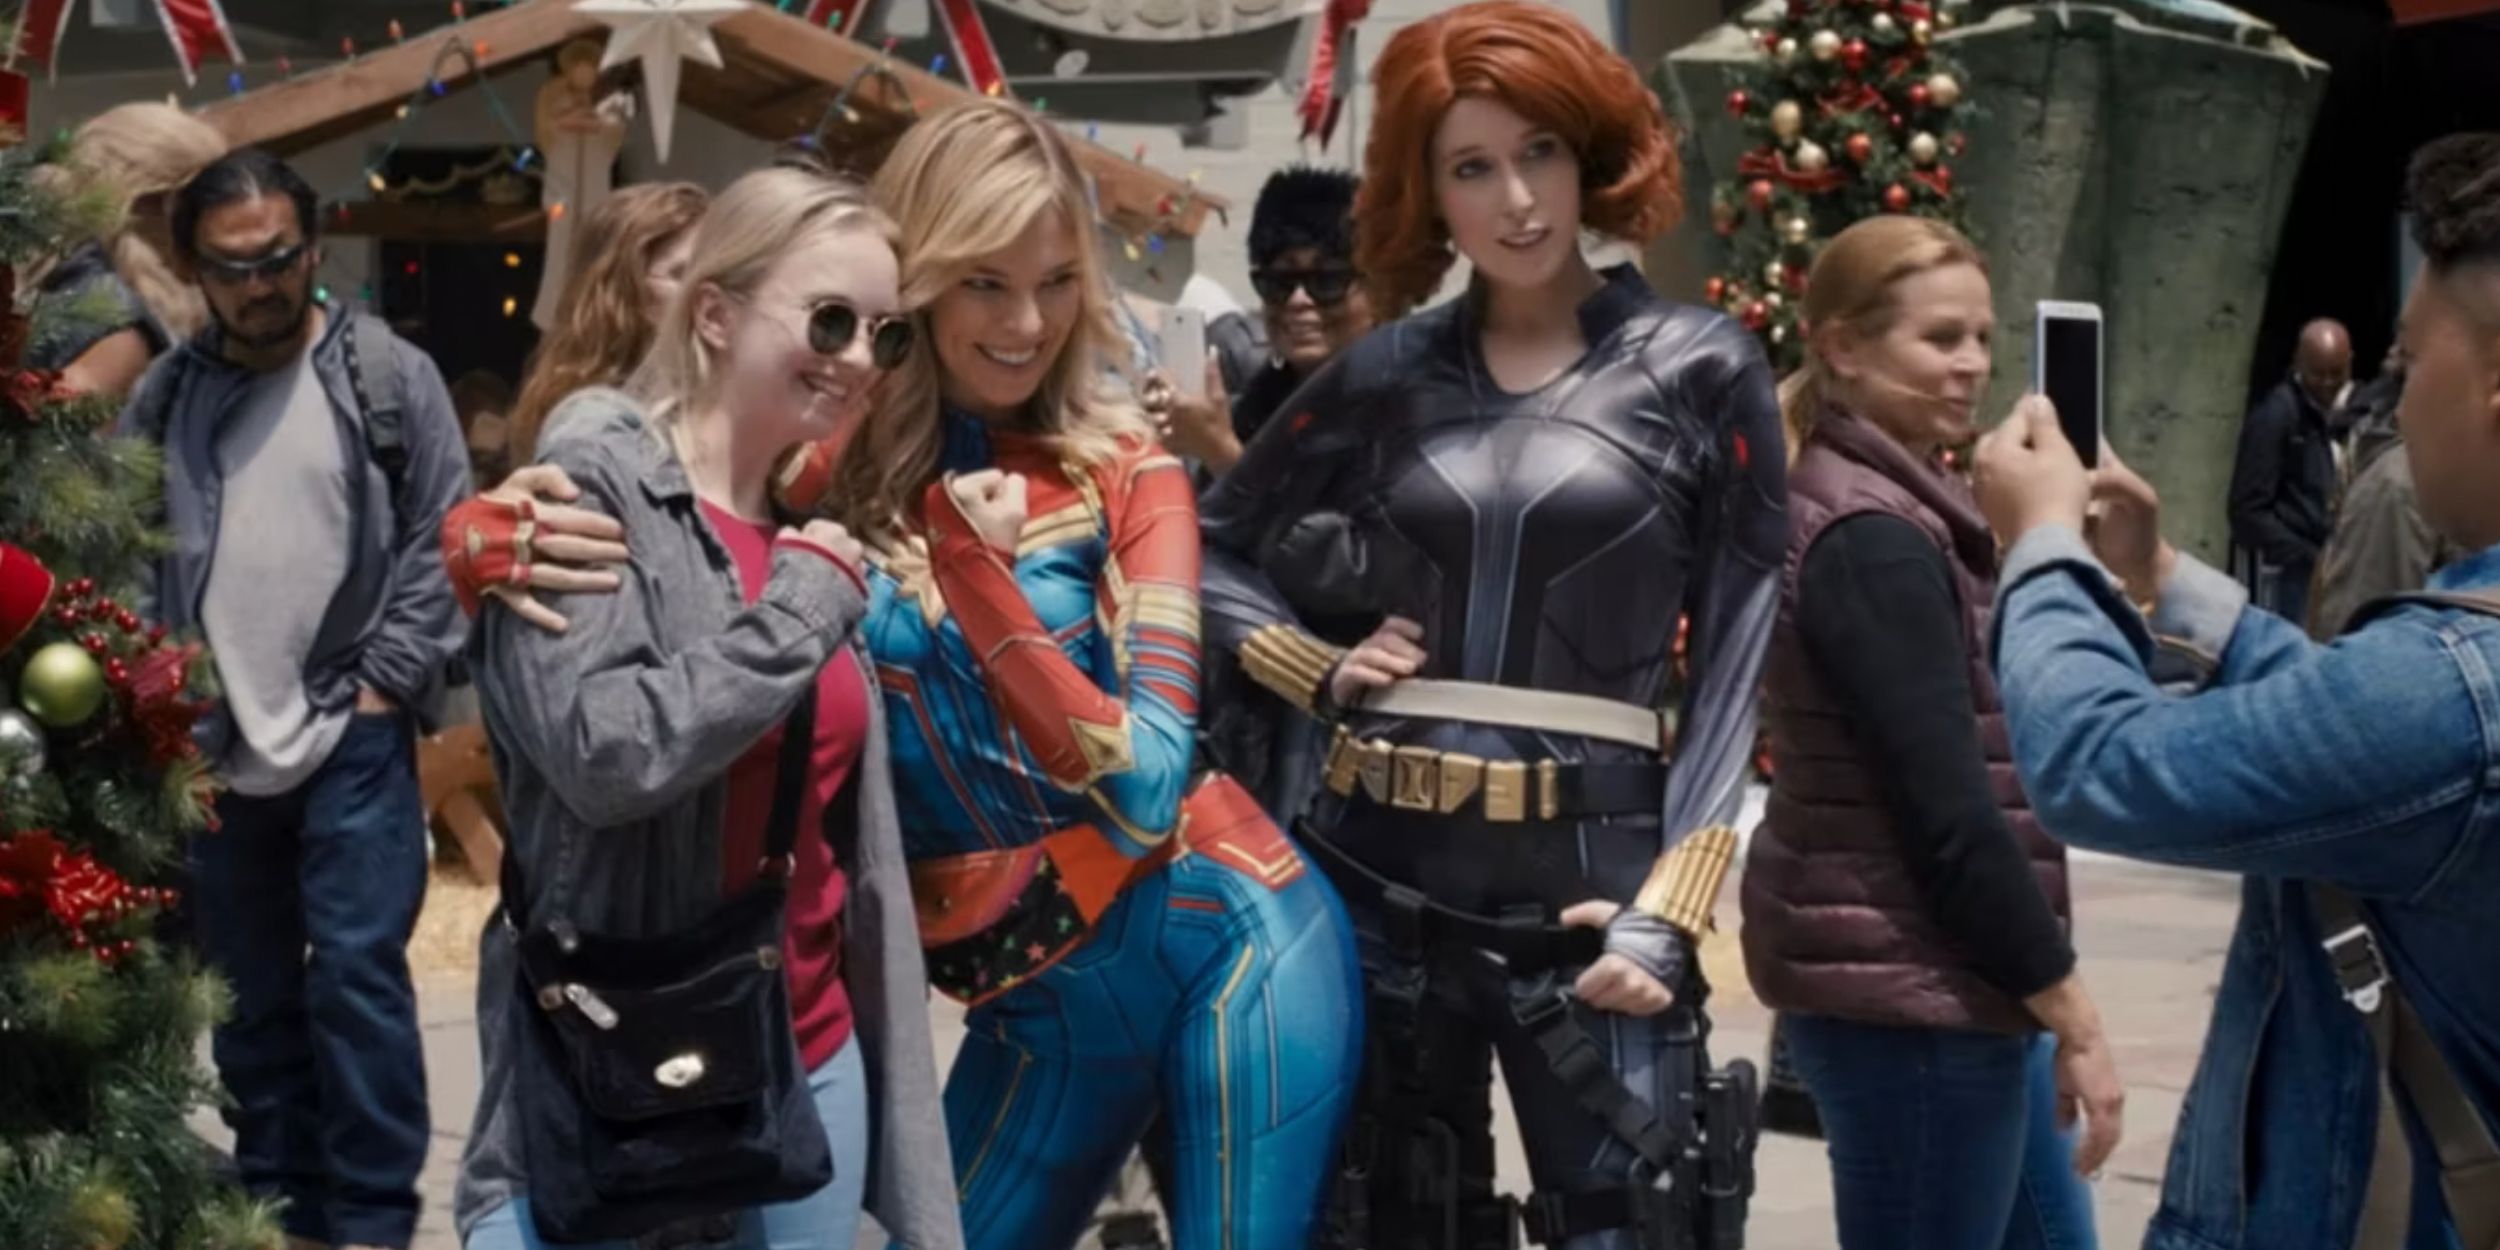 Captain Marvel and Black Widow character actors pose with fans for pictures in Guardians of the Galaxy Holiday Special